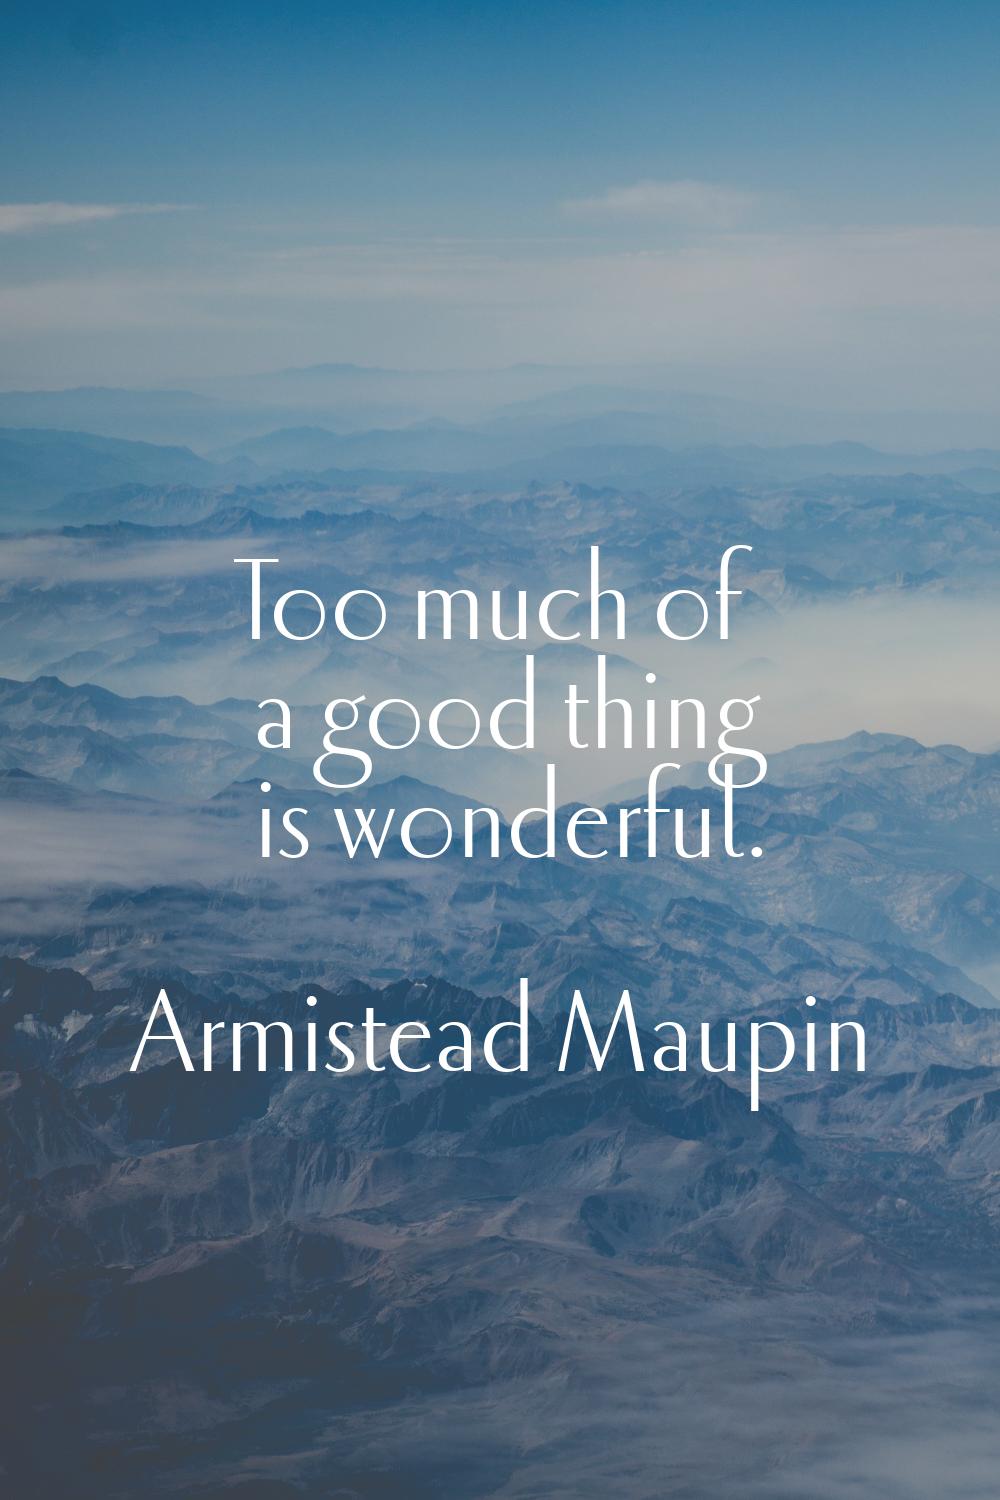 Too much of a good thing is wonderful.